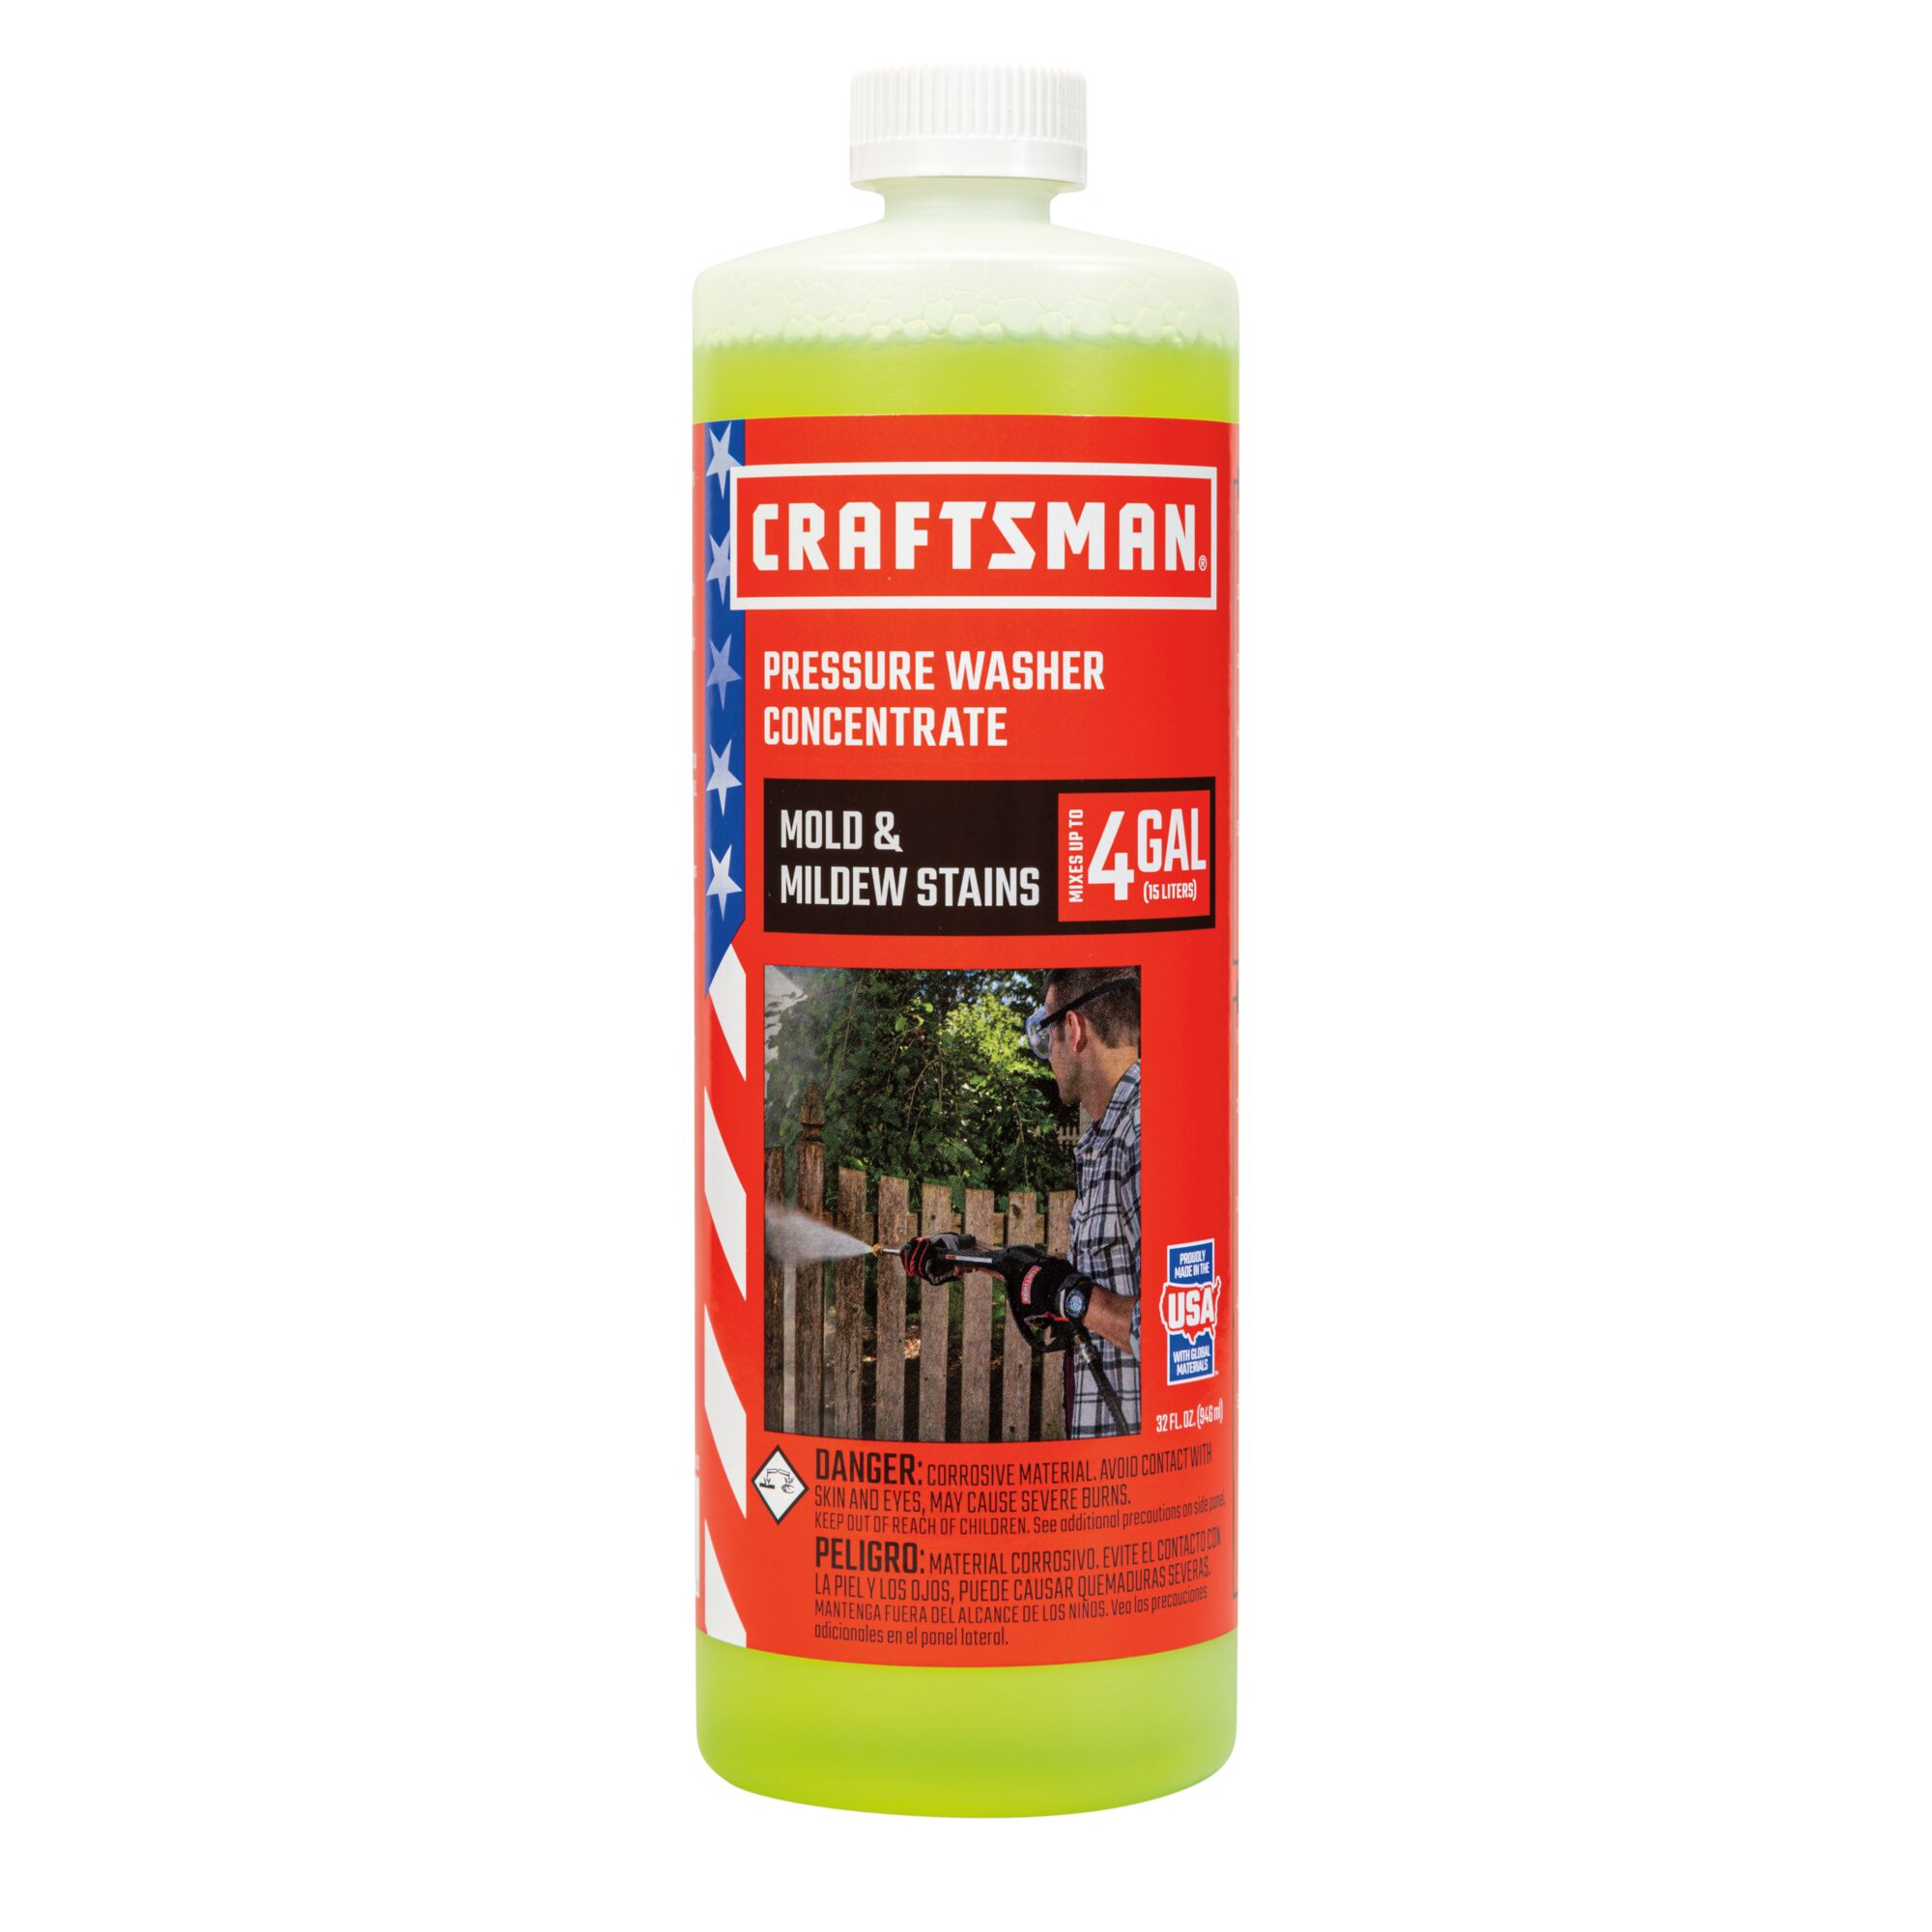 Mold and mildew stains pressure washer concentrate.